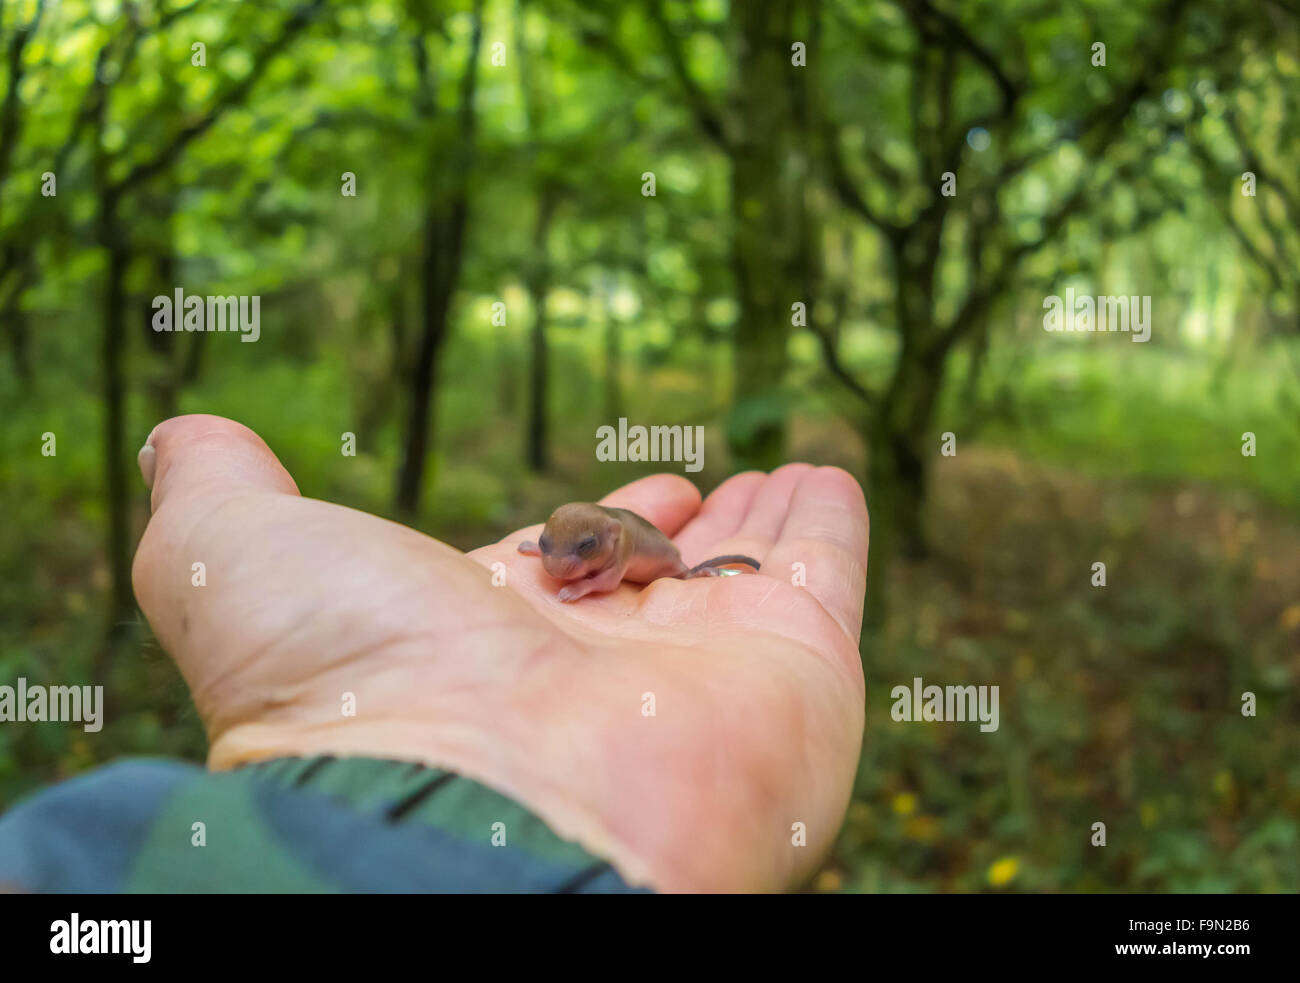 Hazel Dormouse (Muscardinus avellanarius) 7/10 days old monitoring being carried out by License holder Stock Photo